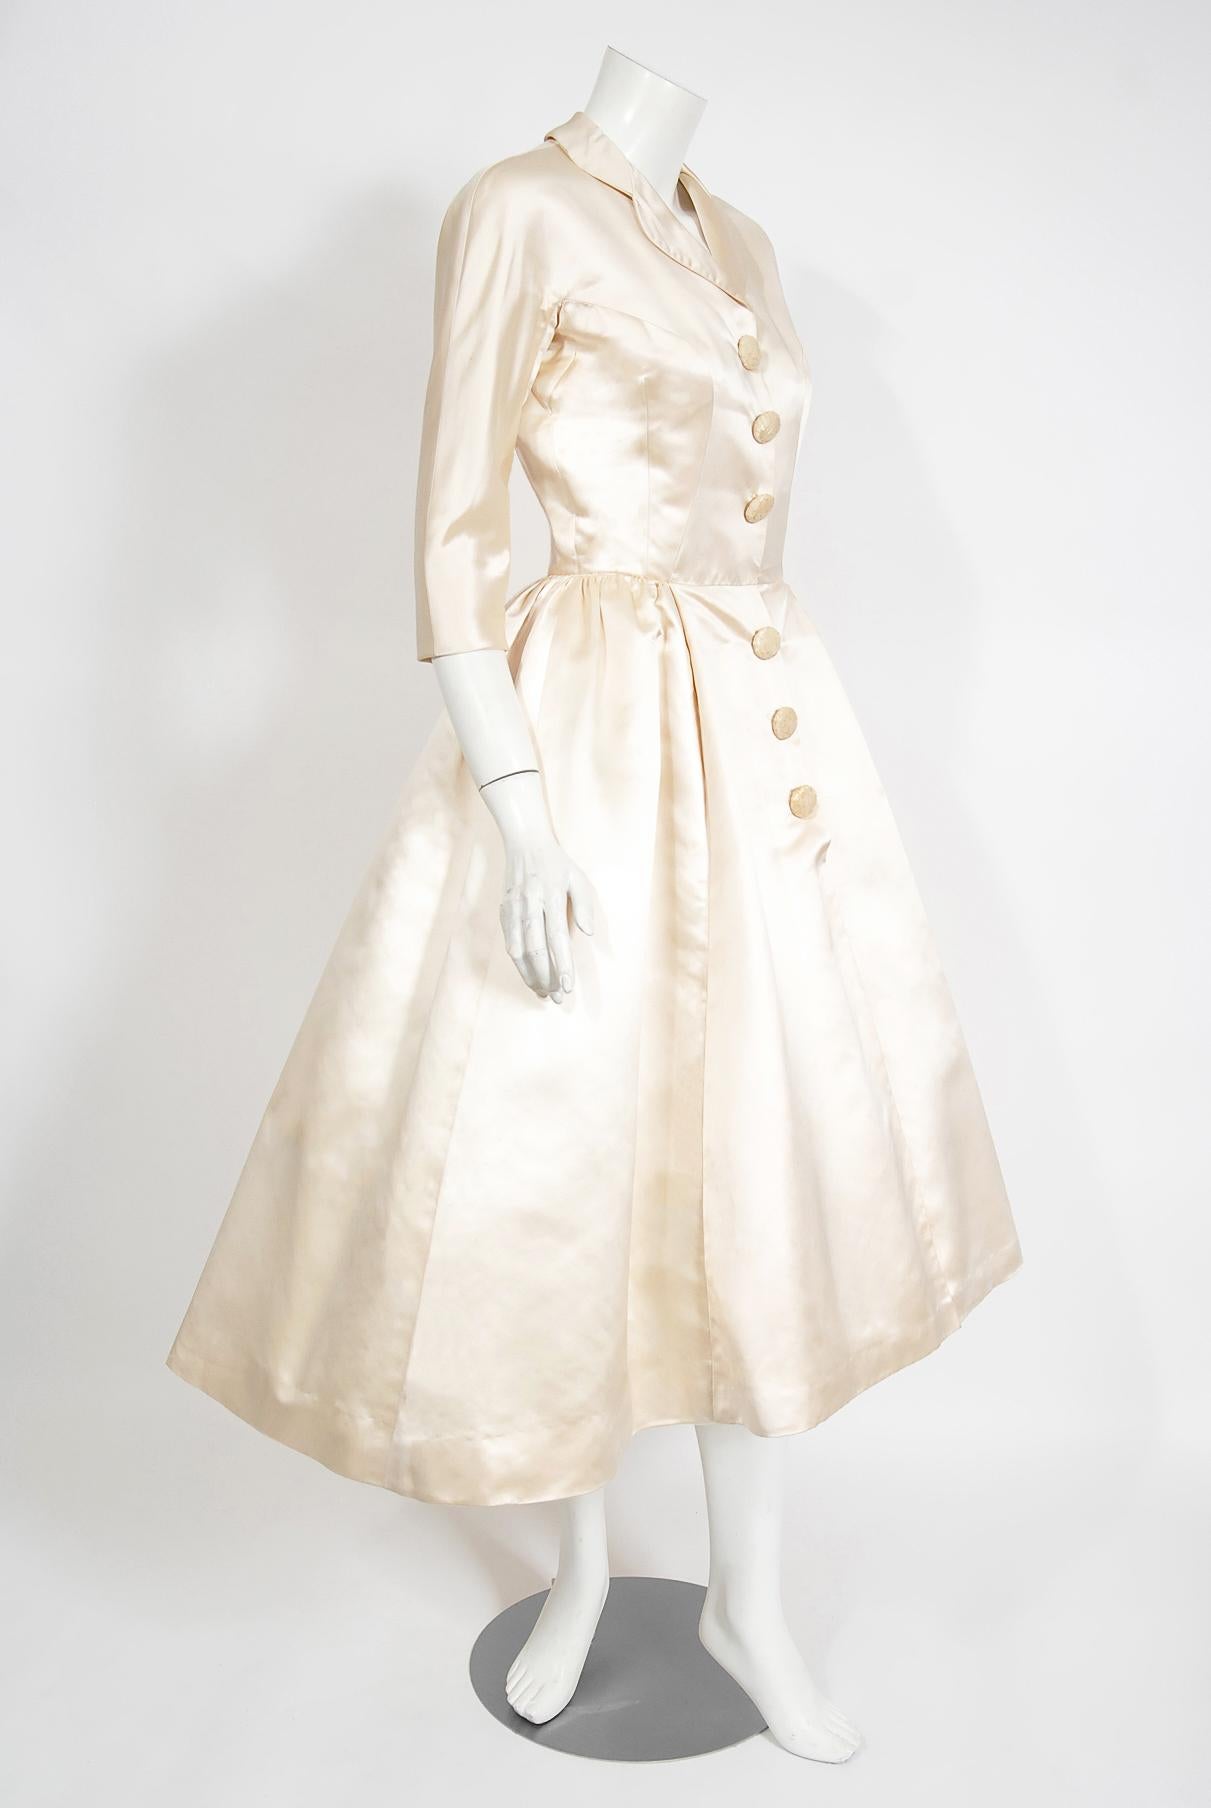 Vintage 1950's Traina-Norell Couture Ivory Silk Satin Full Skirted Bridal Dress 2